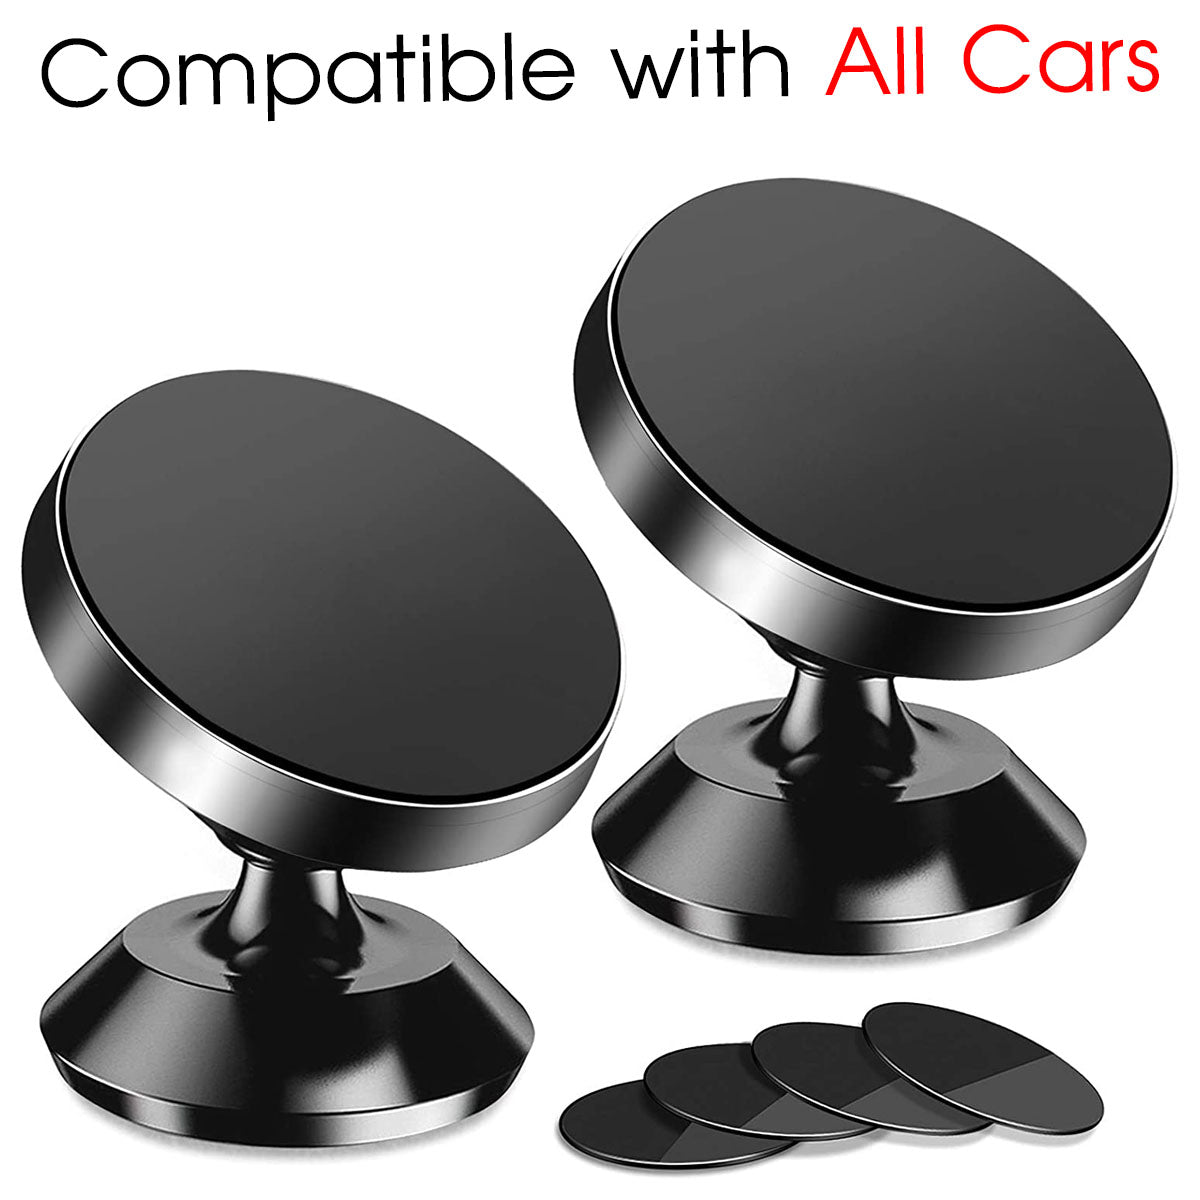 [2 Pack ] Magnetic Phone Mount, Custom For Your Cars, [ Super Strong Magnet ] [ with 4 Metal Plate ] car Magnetic Phone Holder, [ 360° Rotation ] Universal Dashboard car Mount Fits All Cell Phones, Car Accessories LR13982